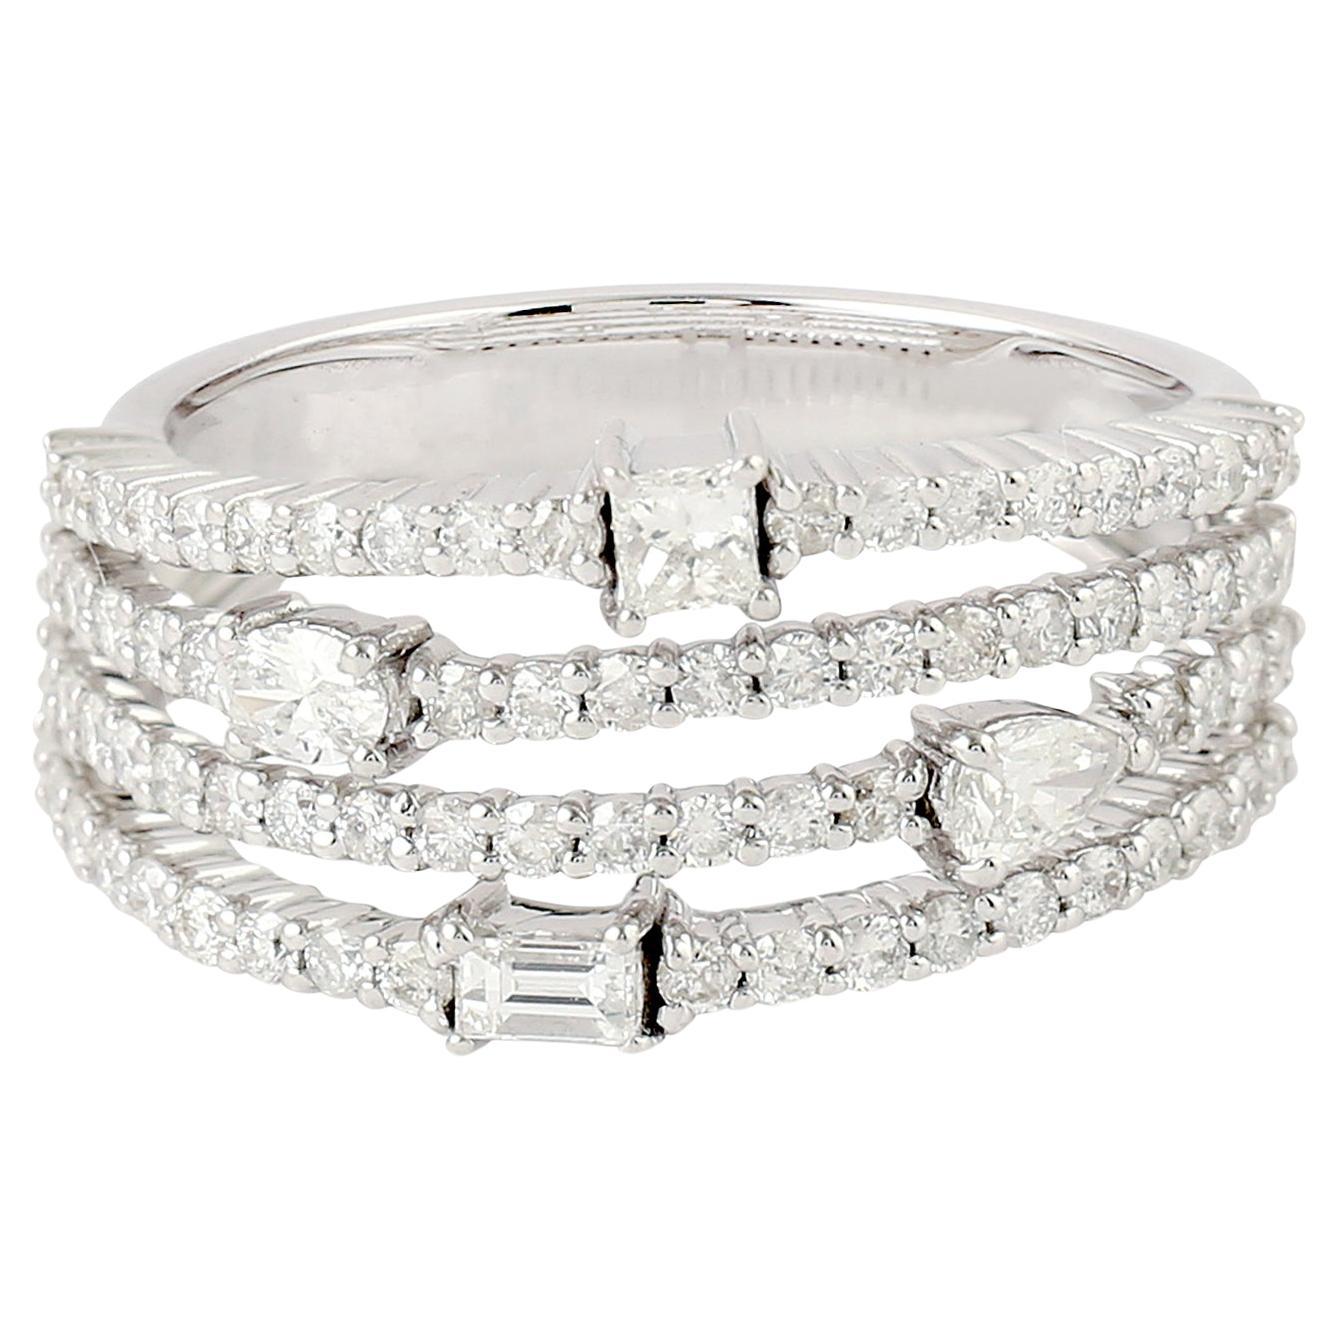 Fancy Diamond Band Ring With Pave Diamonds Made In 18k White Gold